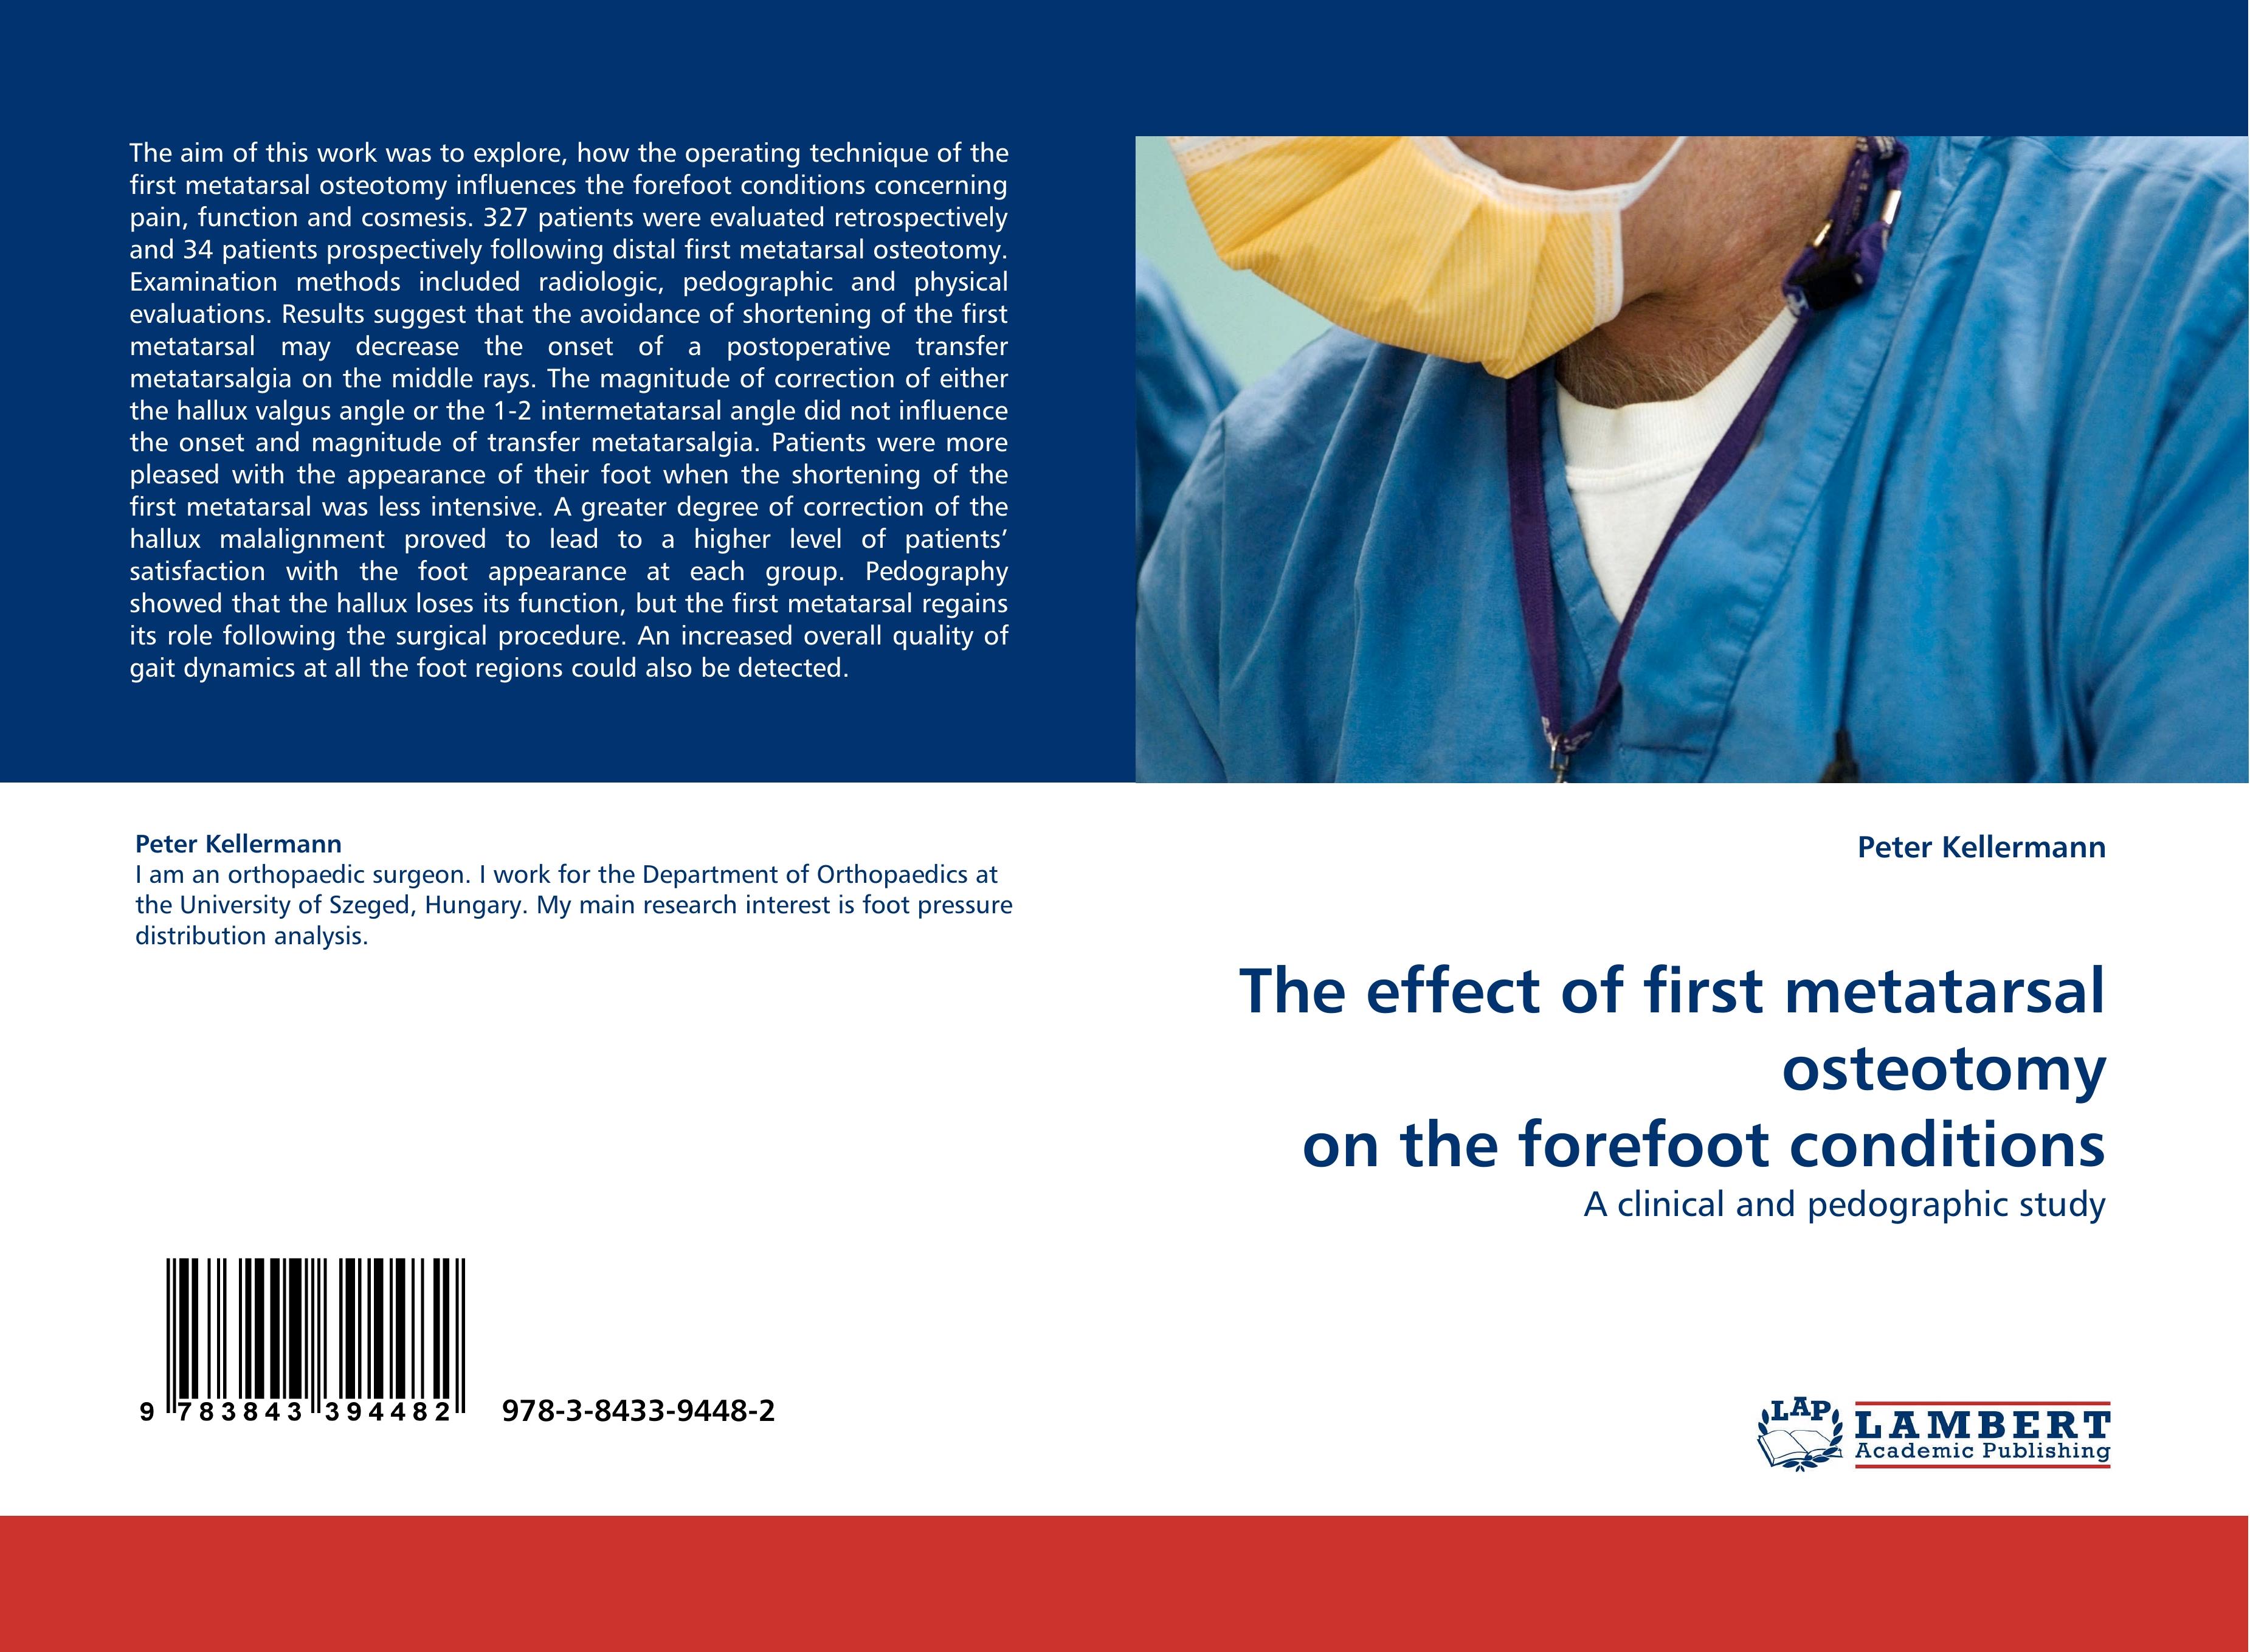 The effect of first metatarsal osteotomy on the forefoot conditions - Peter Kellermann